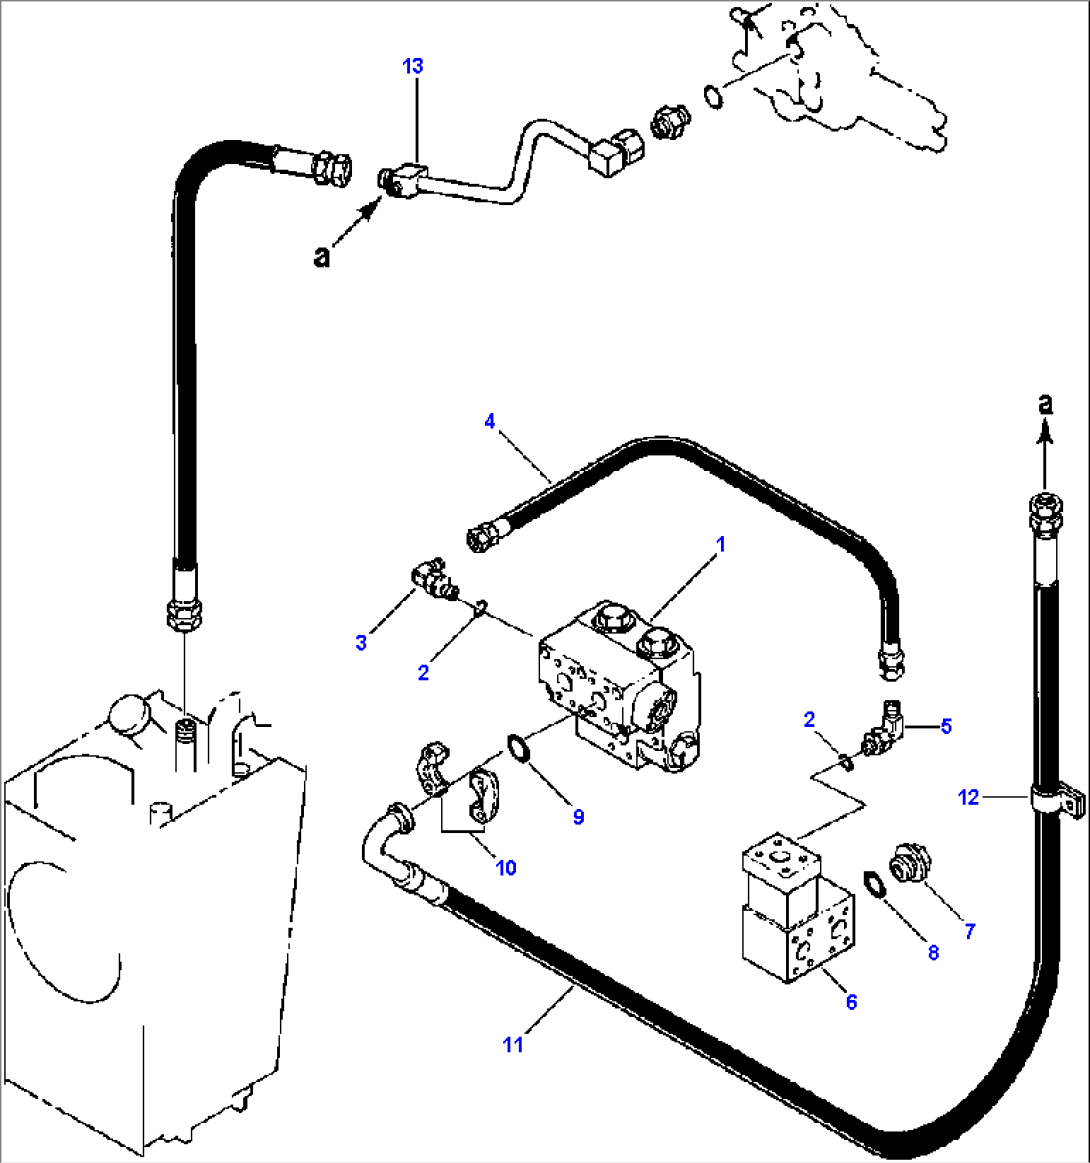 GROUND DRIVEN STEERING PIPING DIVIDER VALVE TO CONTROL VALVE